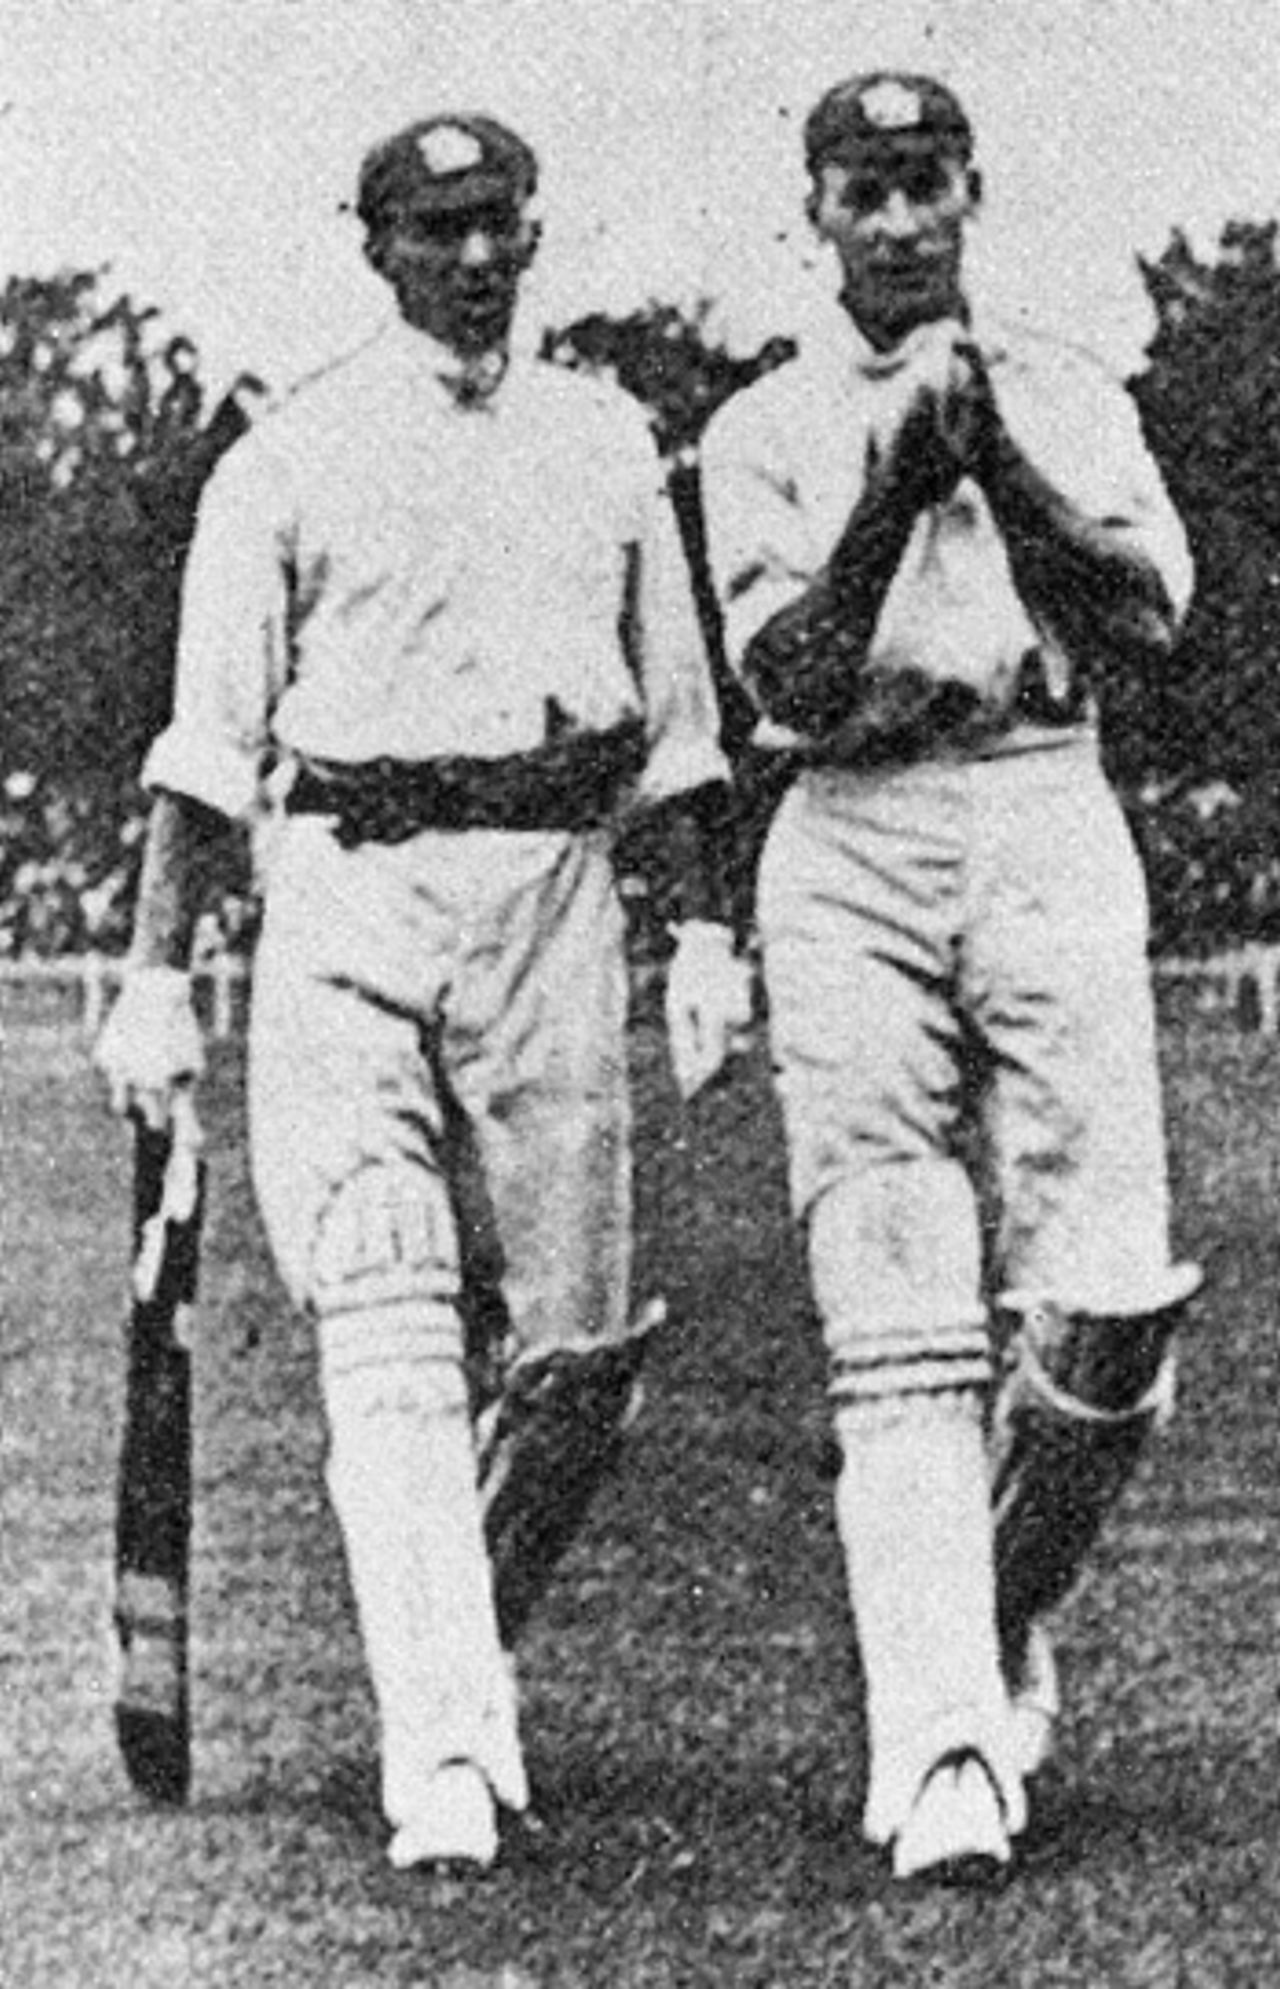 George Gunn and Jack Hobbs open for England in the fourth Test at Melbourne, February 7, 1908